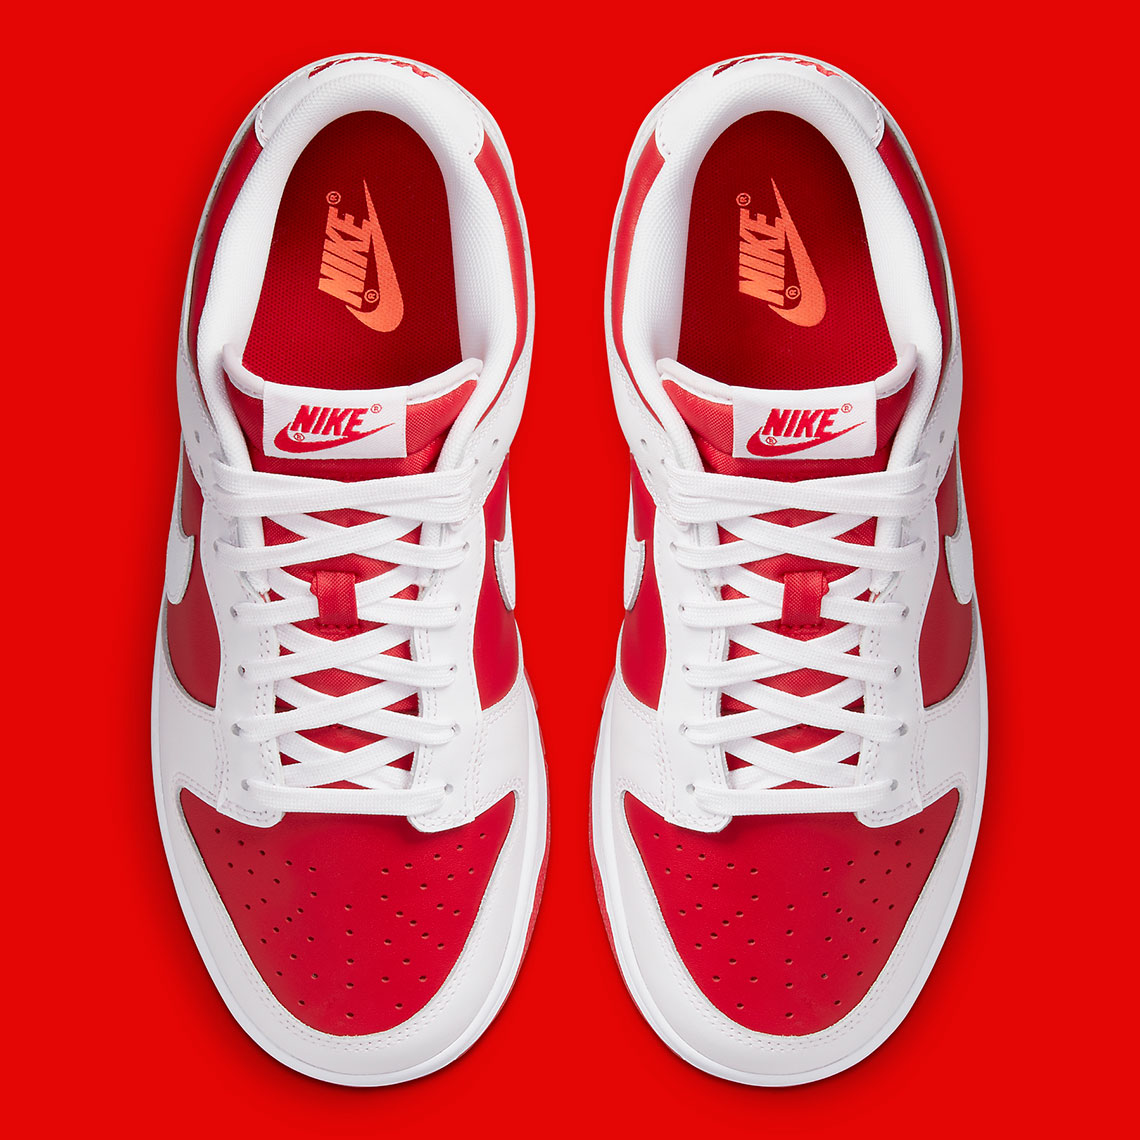 Nike Dunk red dunks Low White University Red DD1391-600 | SneakerNews.com